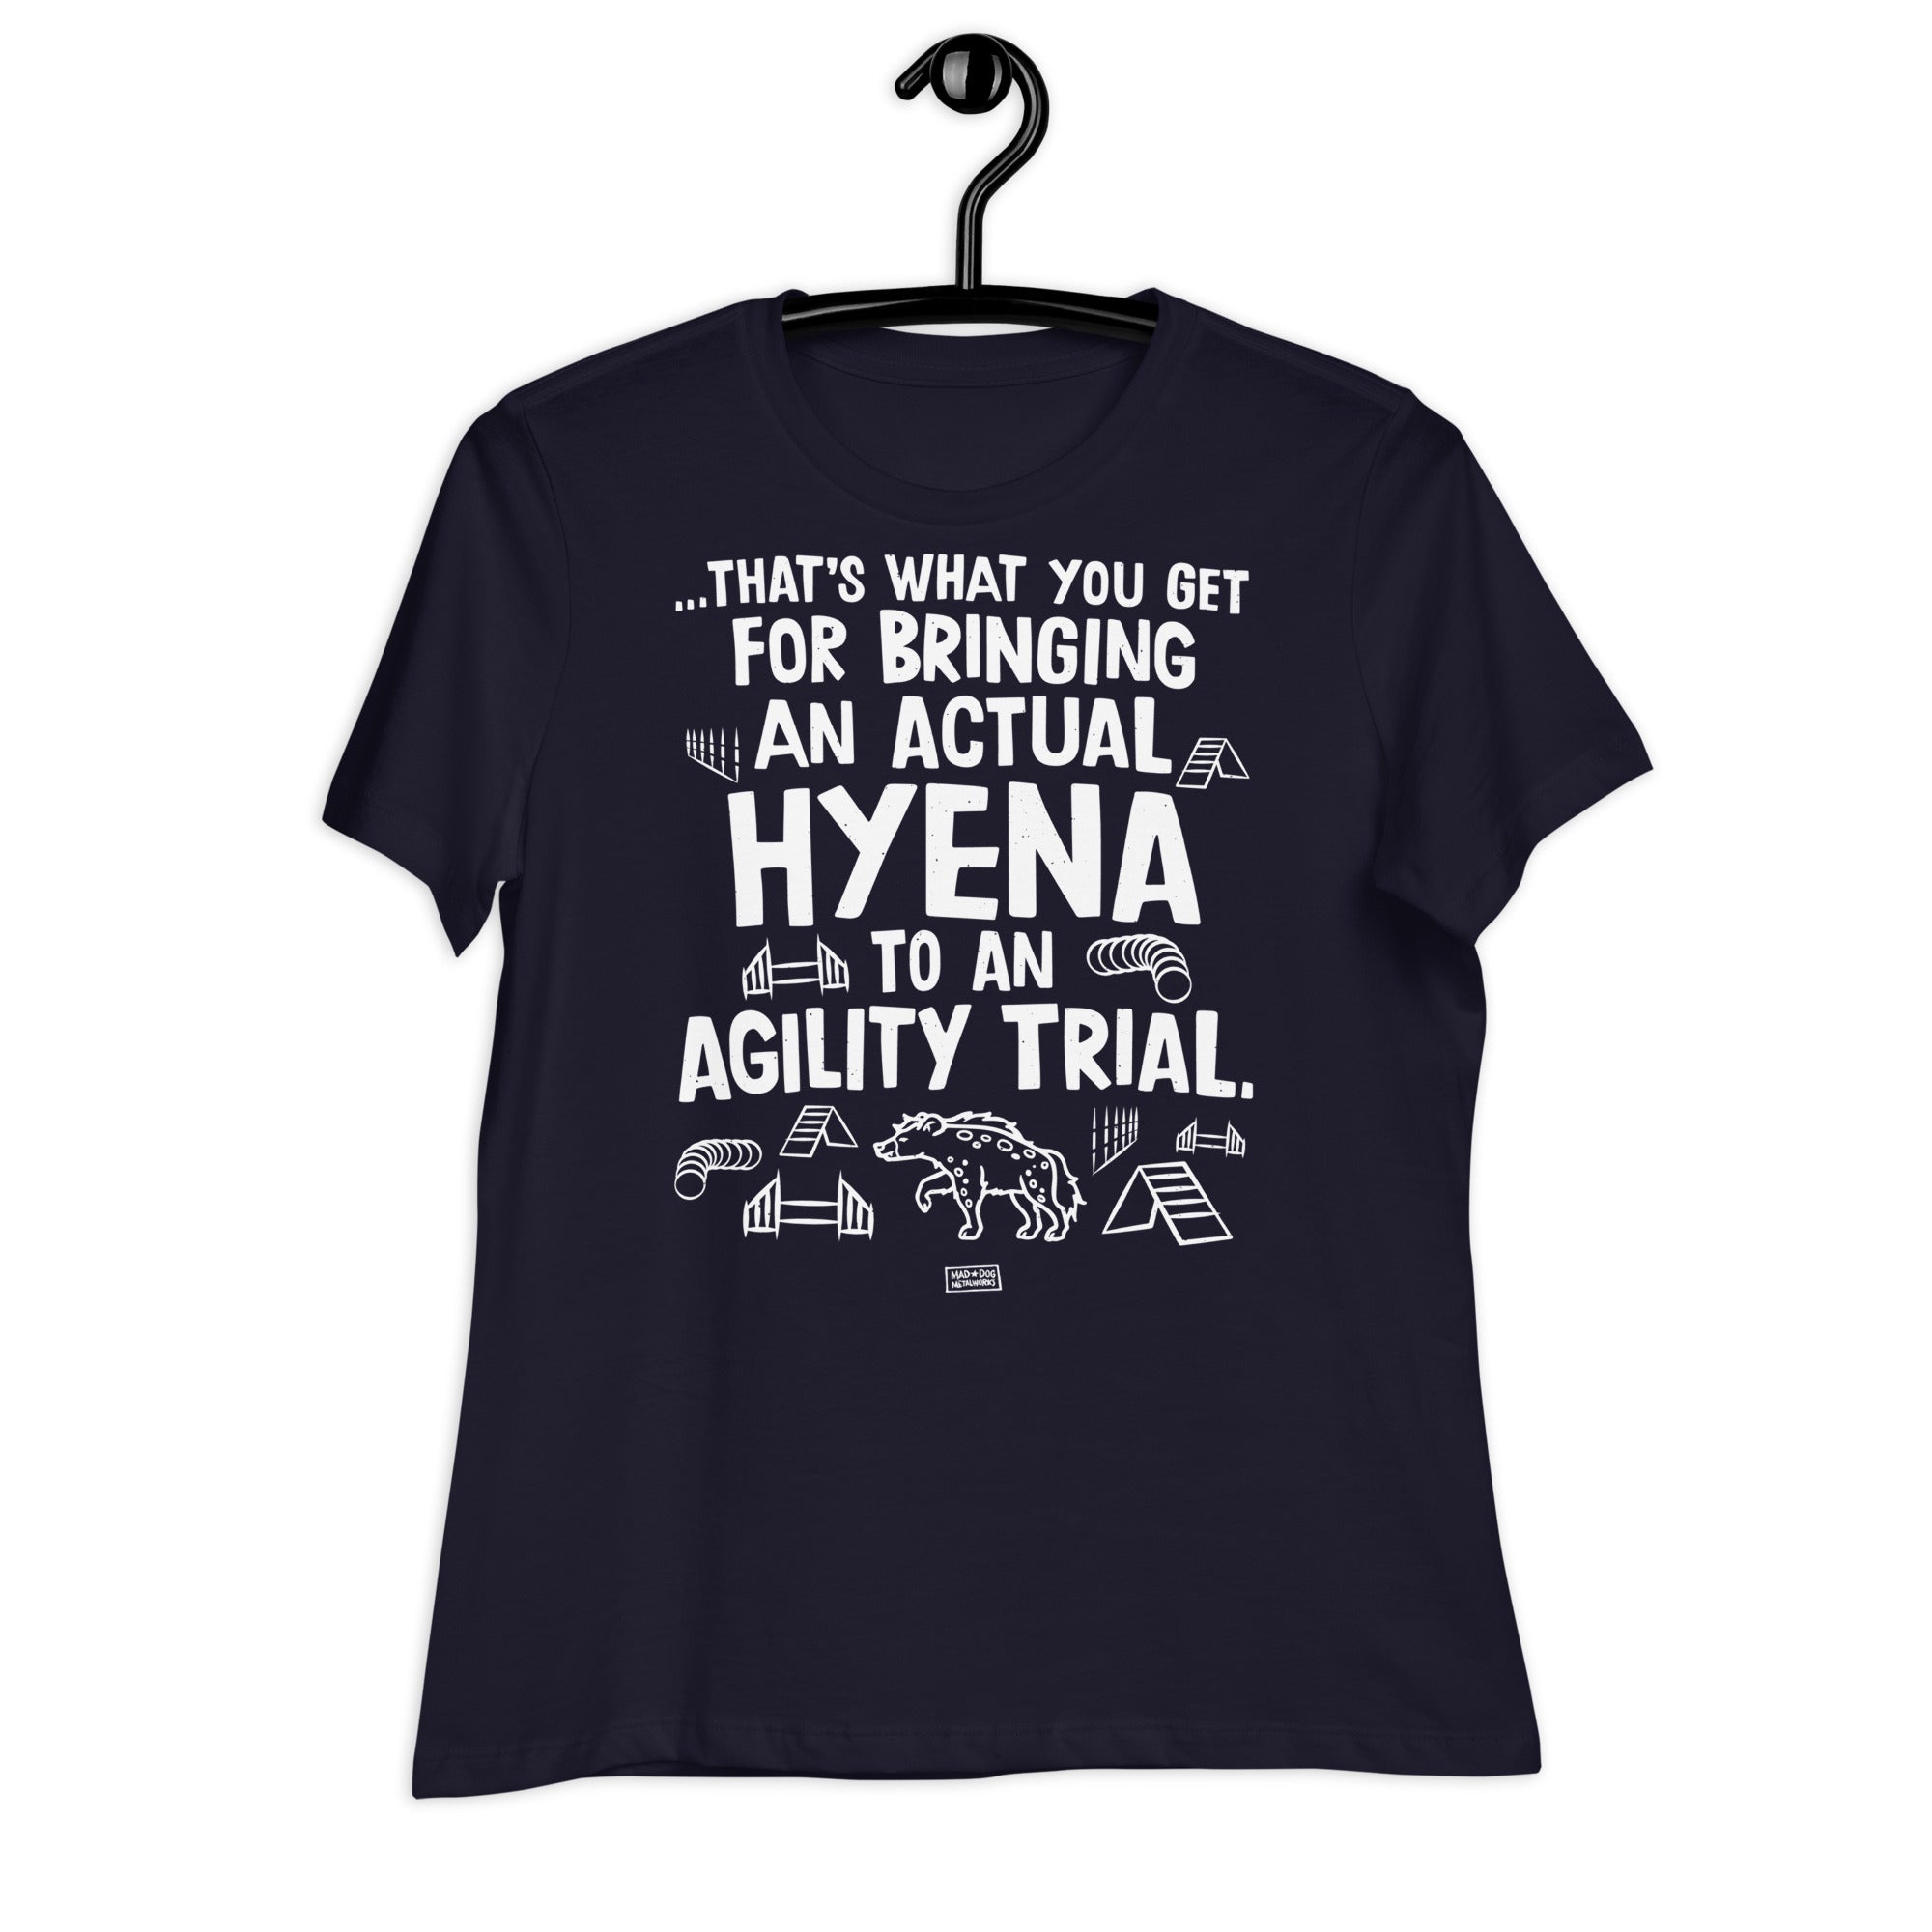 women's relaxed fit t-shirt: hyena agility